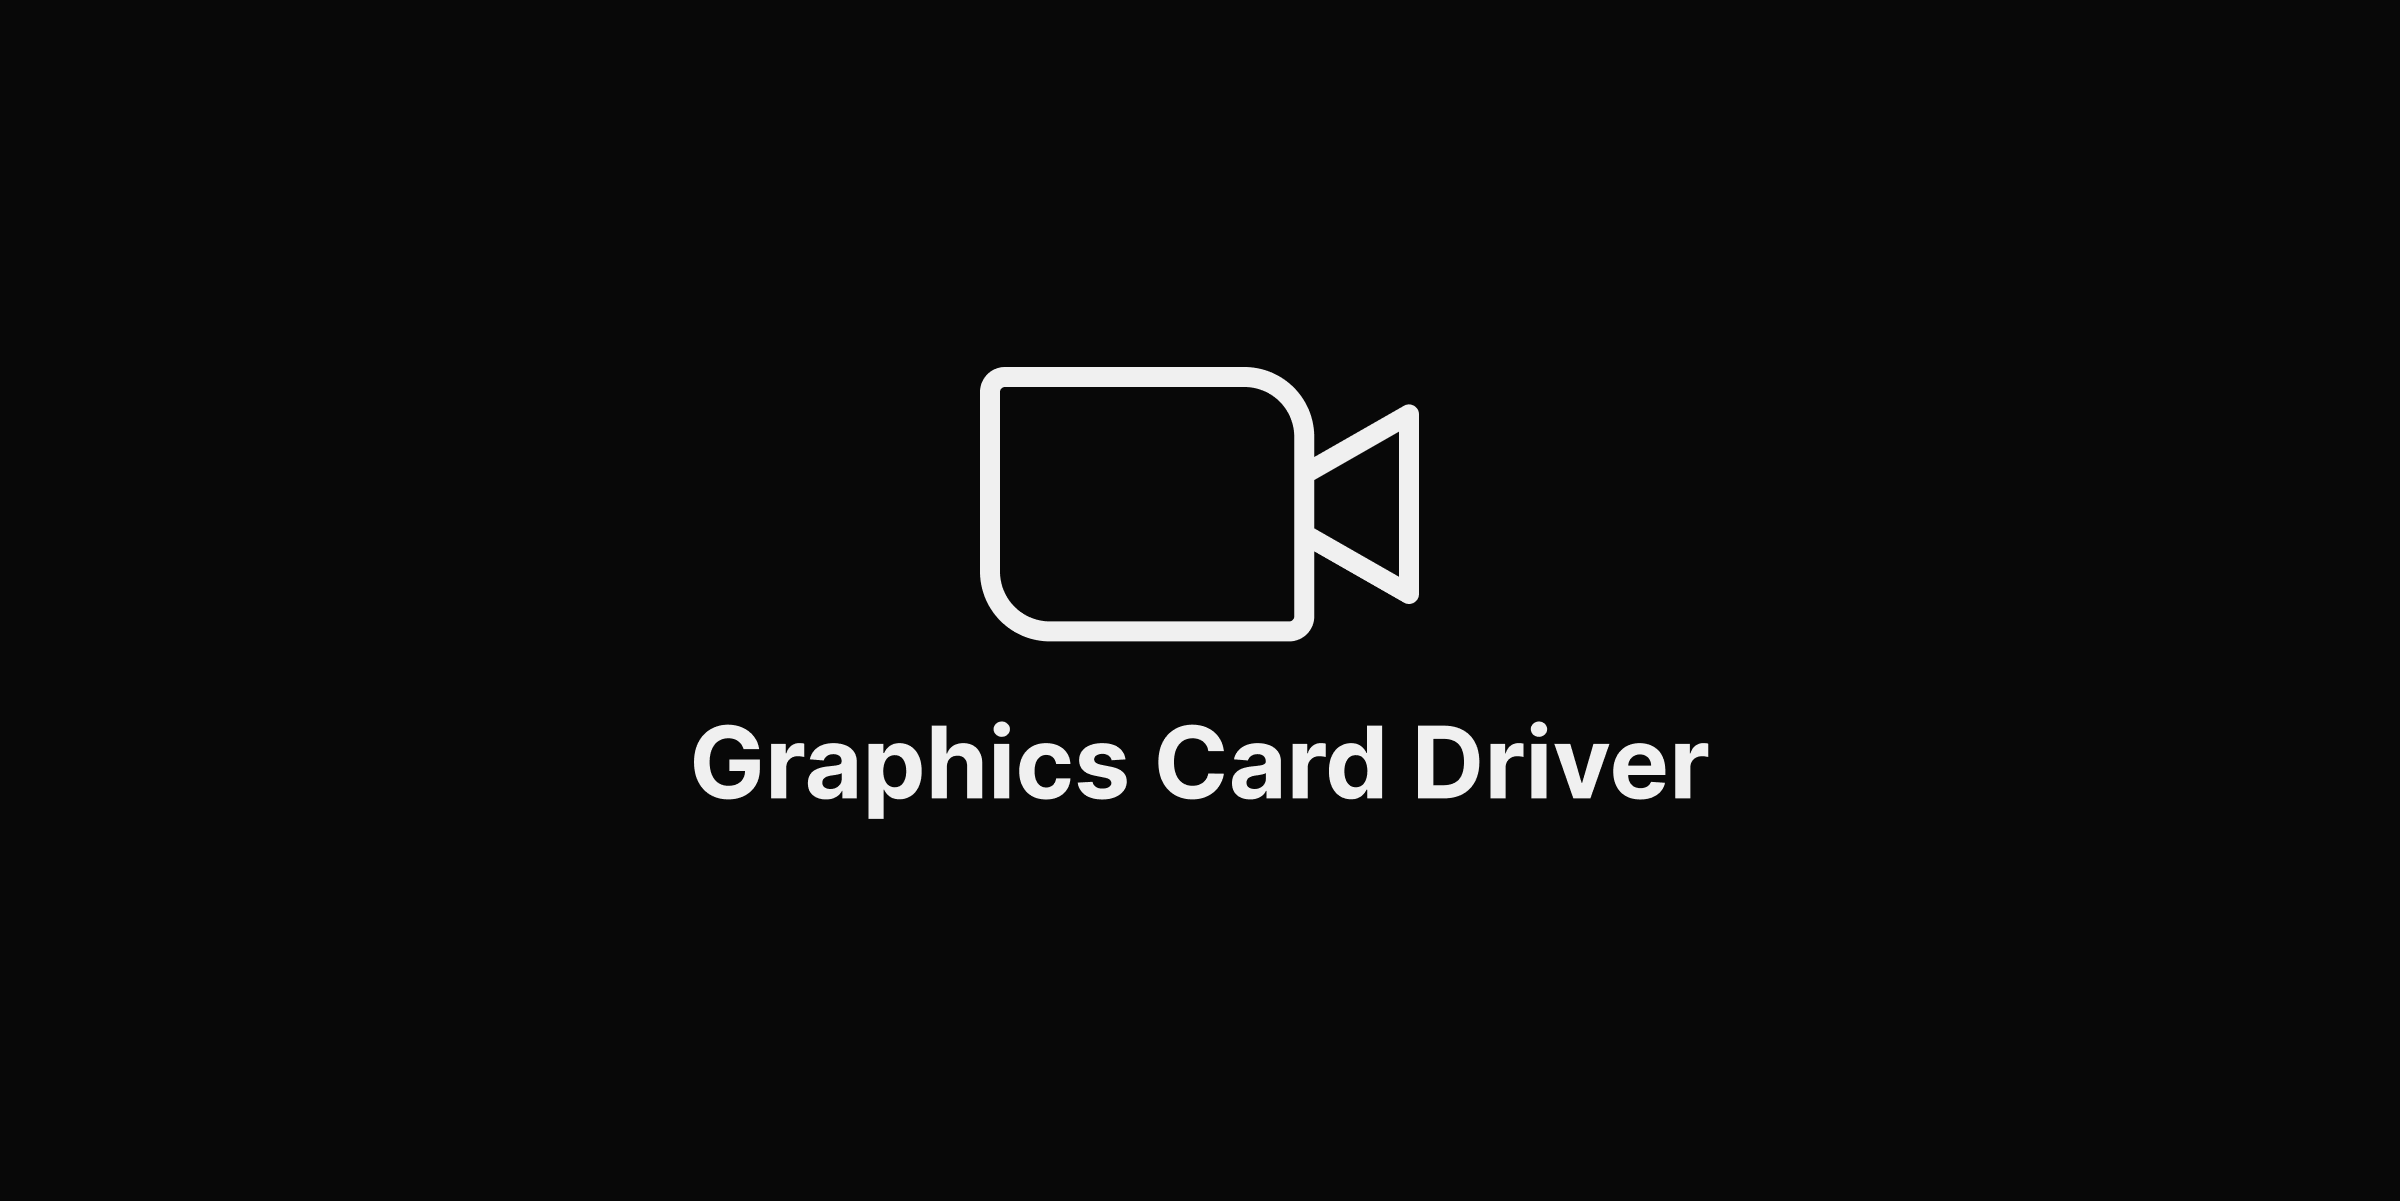 Video card / Graphics card driver